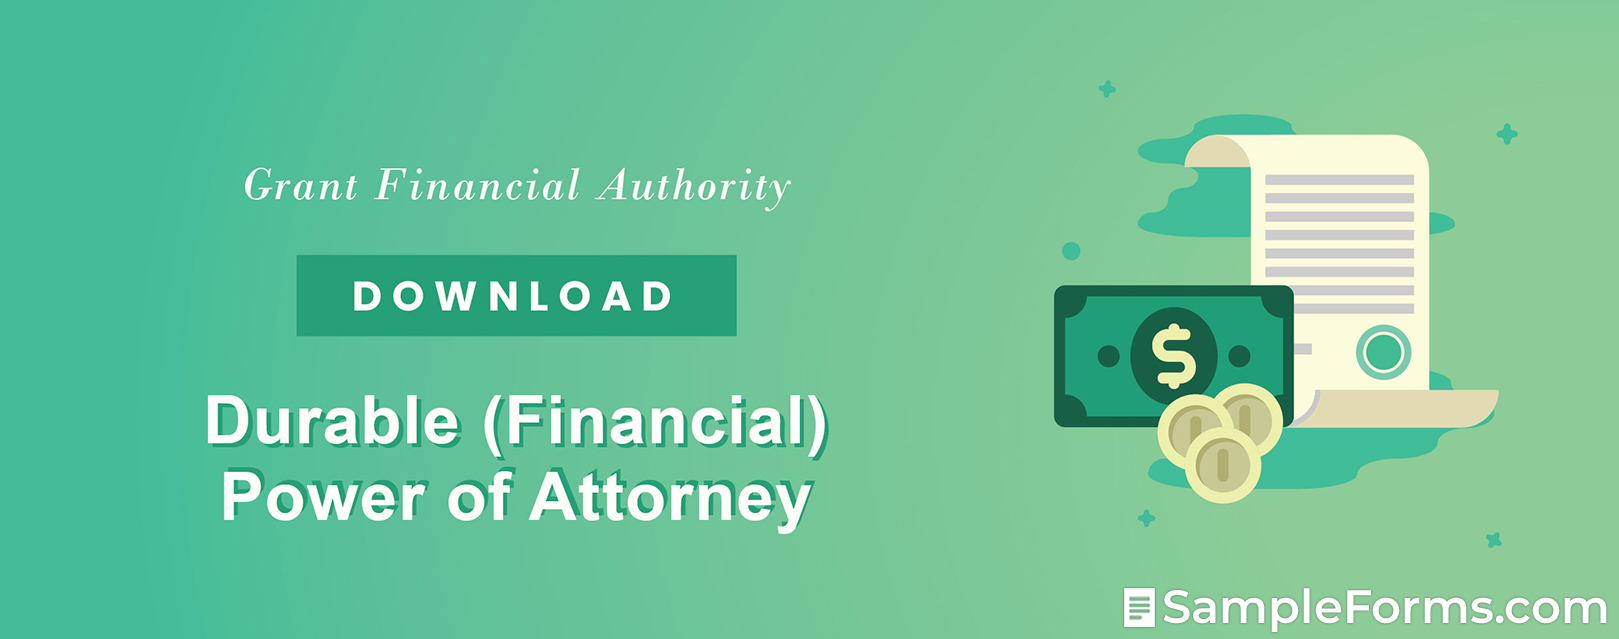 Durable Financial Power of Attorney